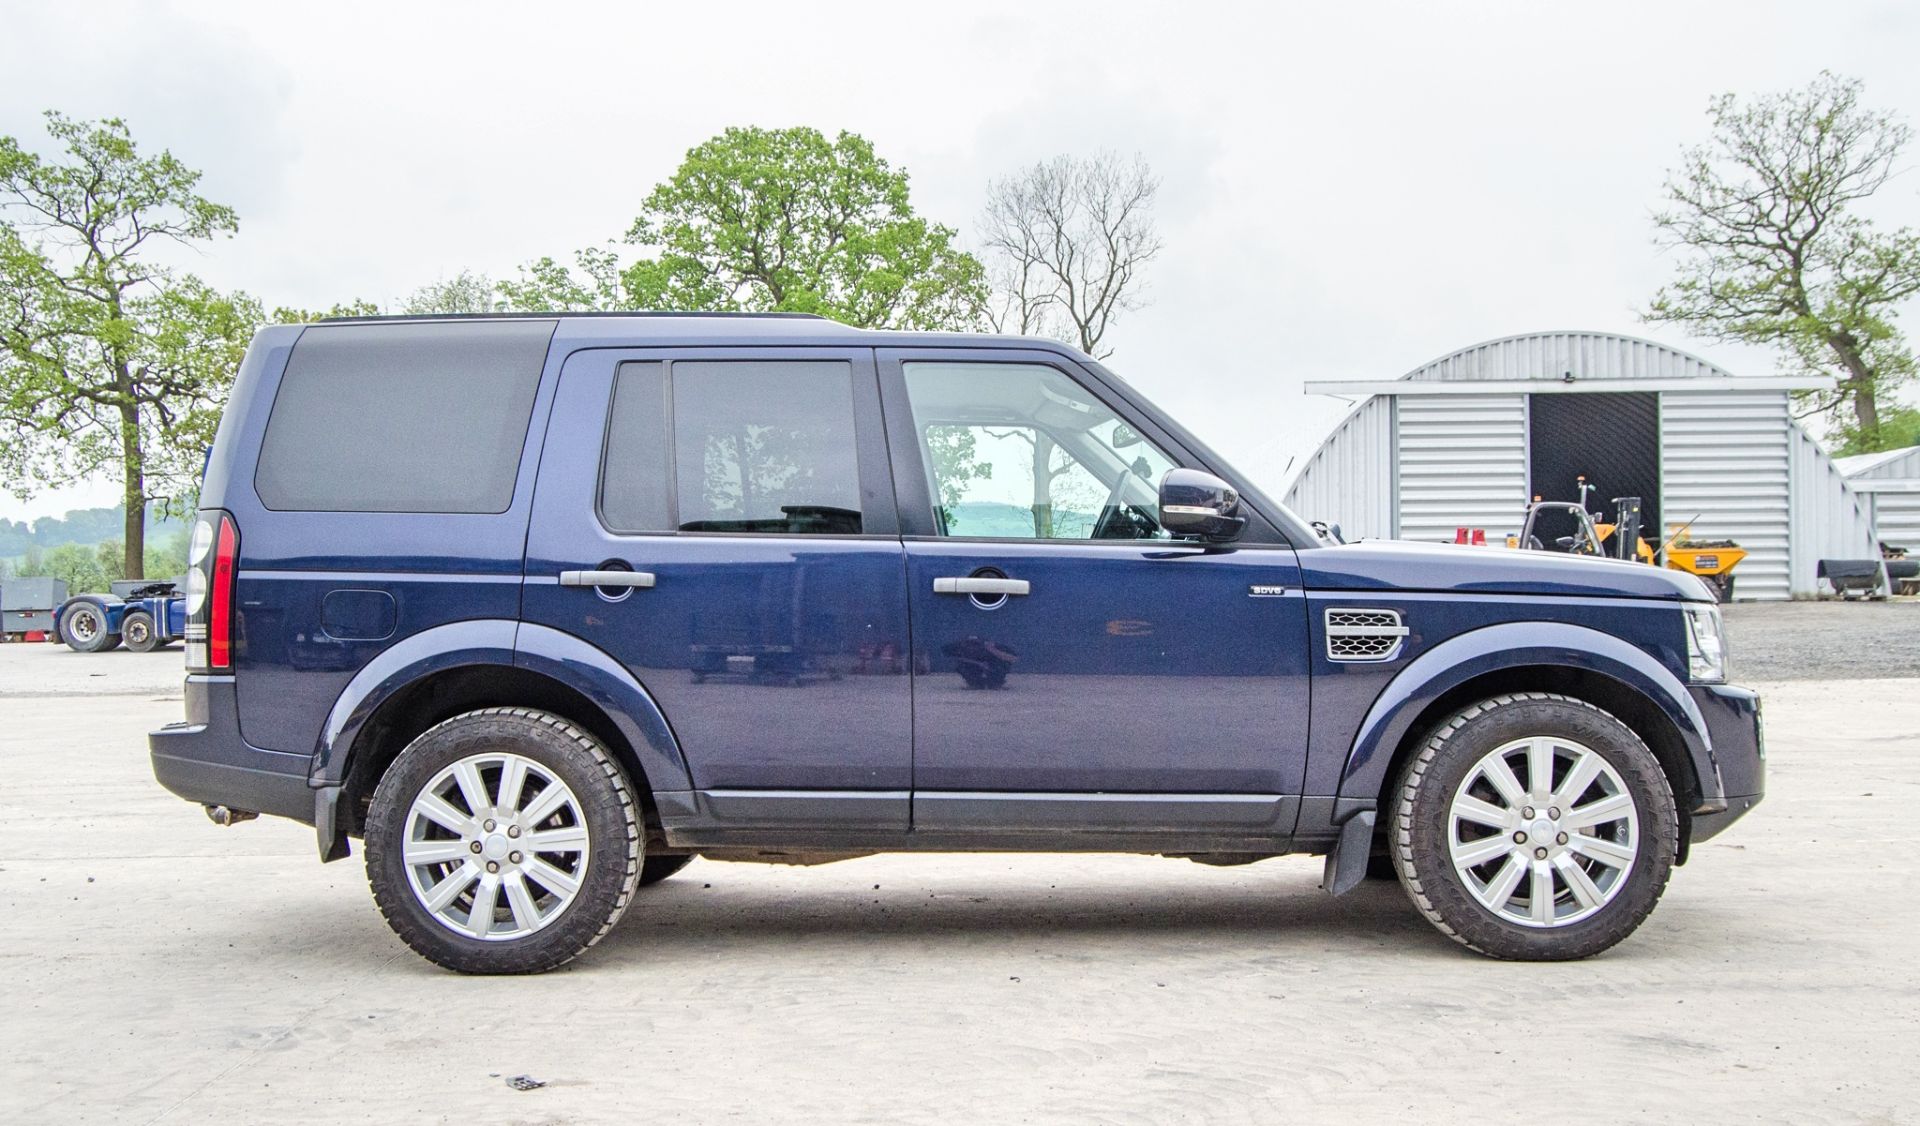 Land Rover Discovery 4 3.0 SDV6 SE Commercial auto 4 wheel drive utility vehicle  Registration - Image 8 of 39